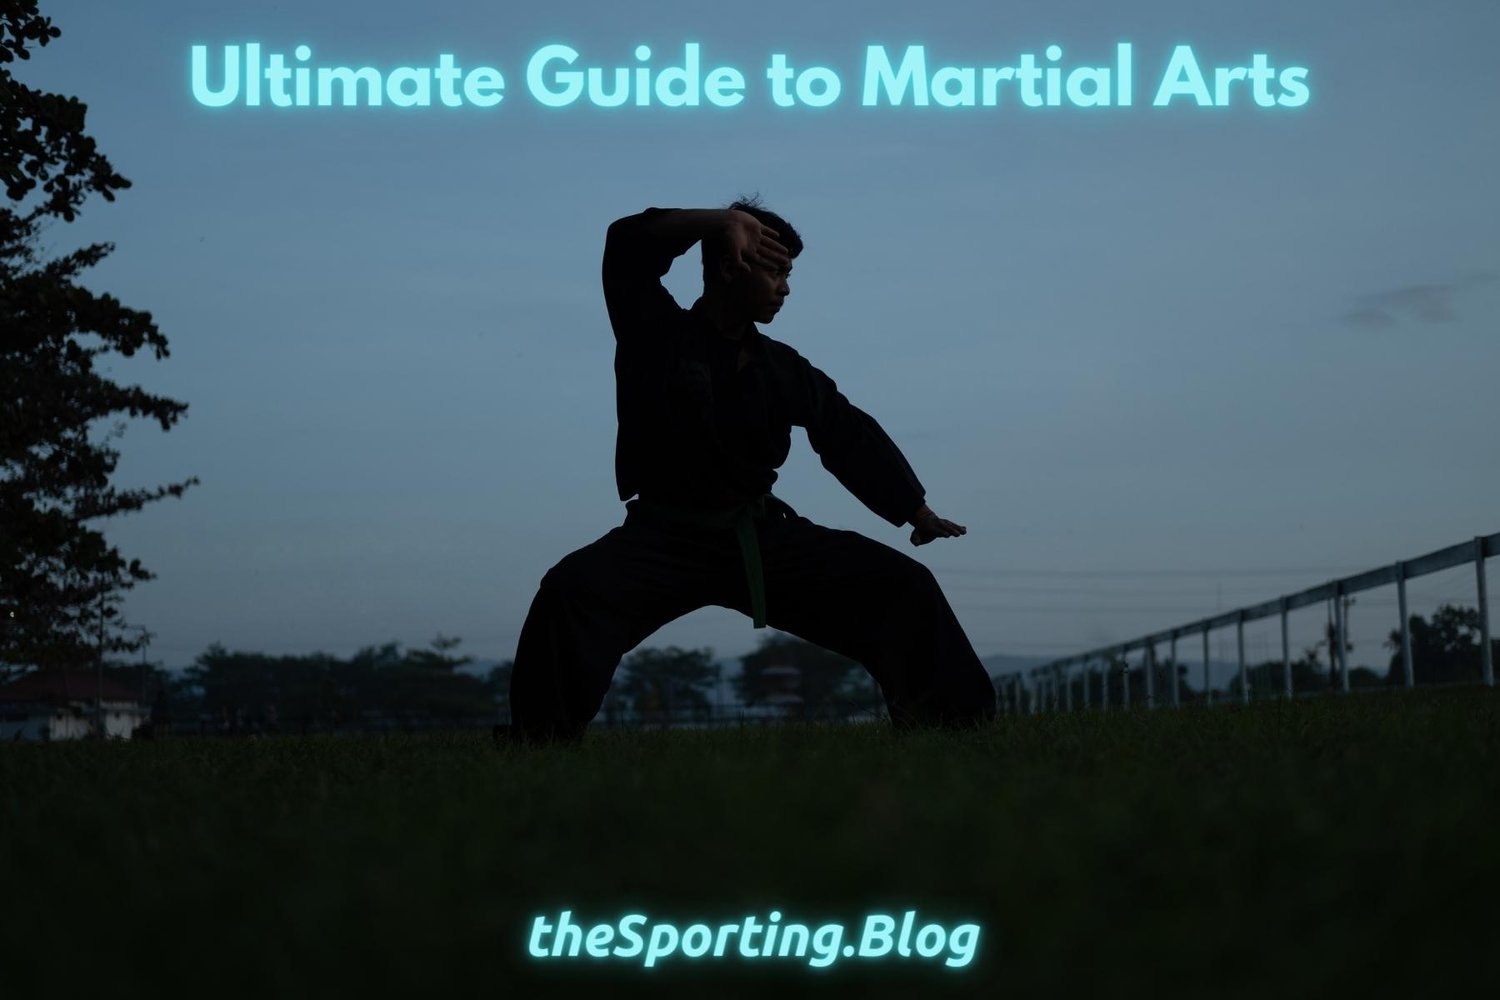 Coming soon: Martial artists competing at full force in high-tech armor